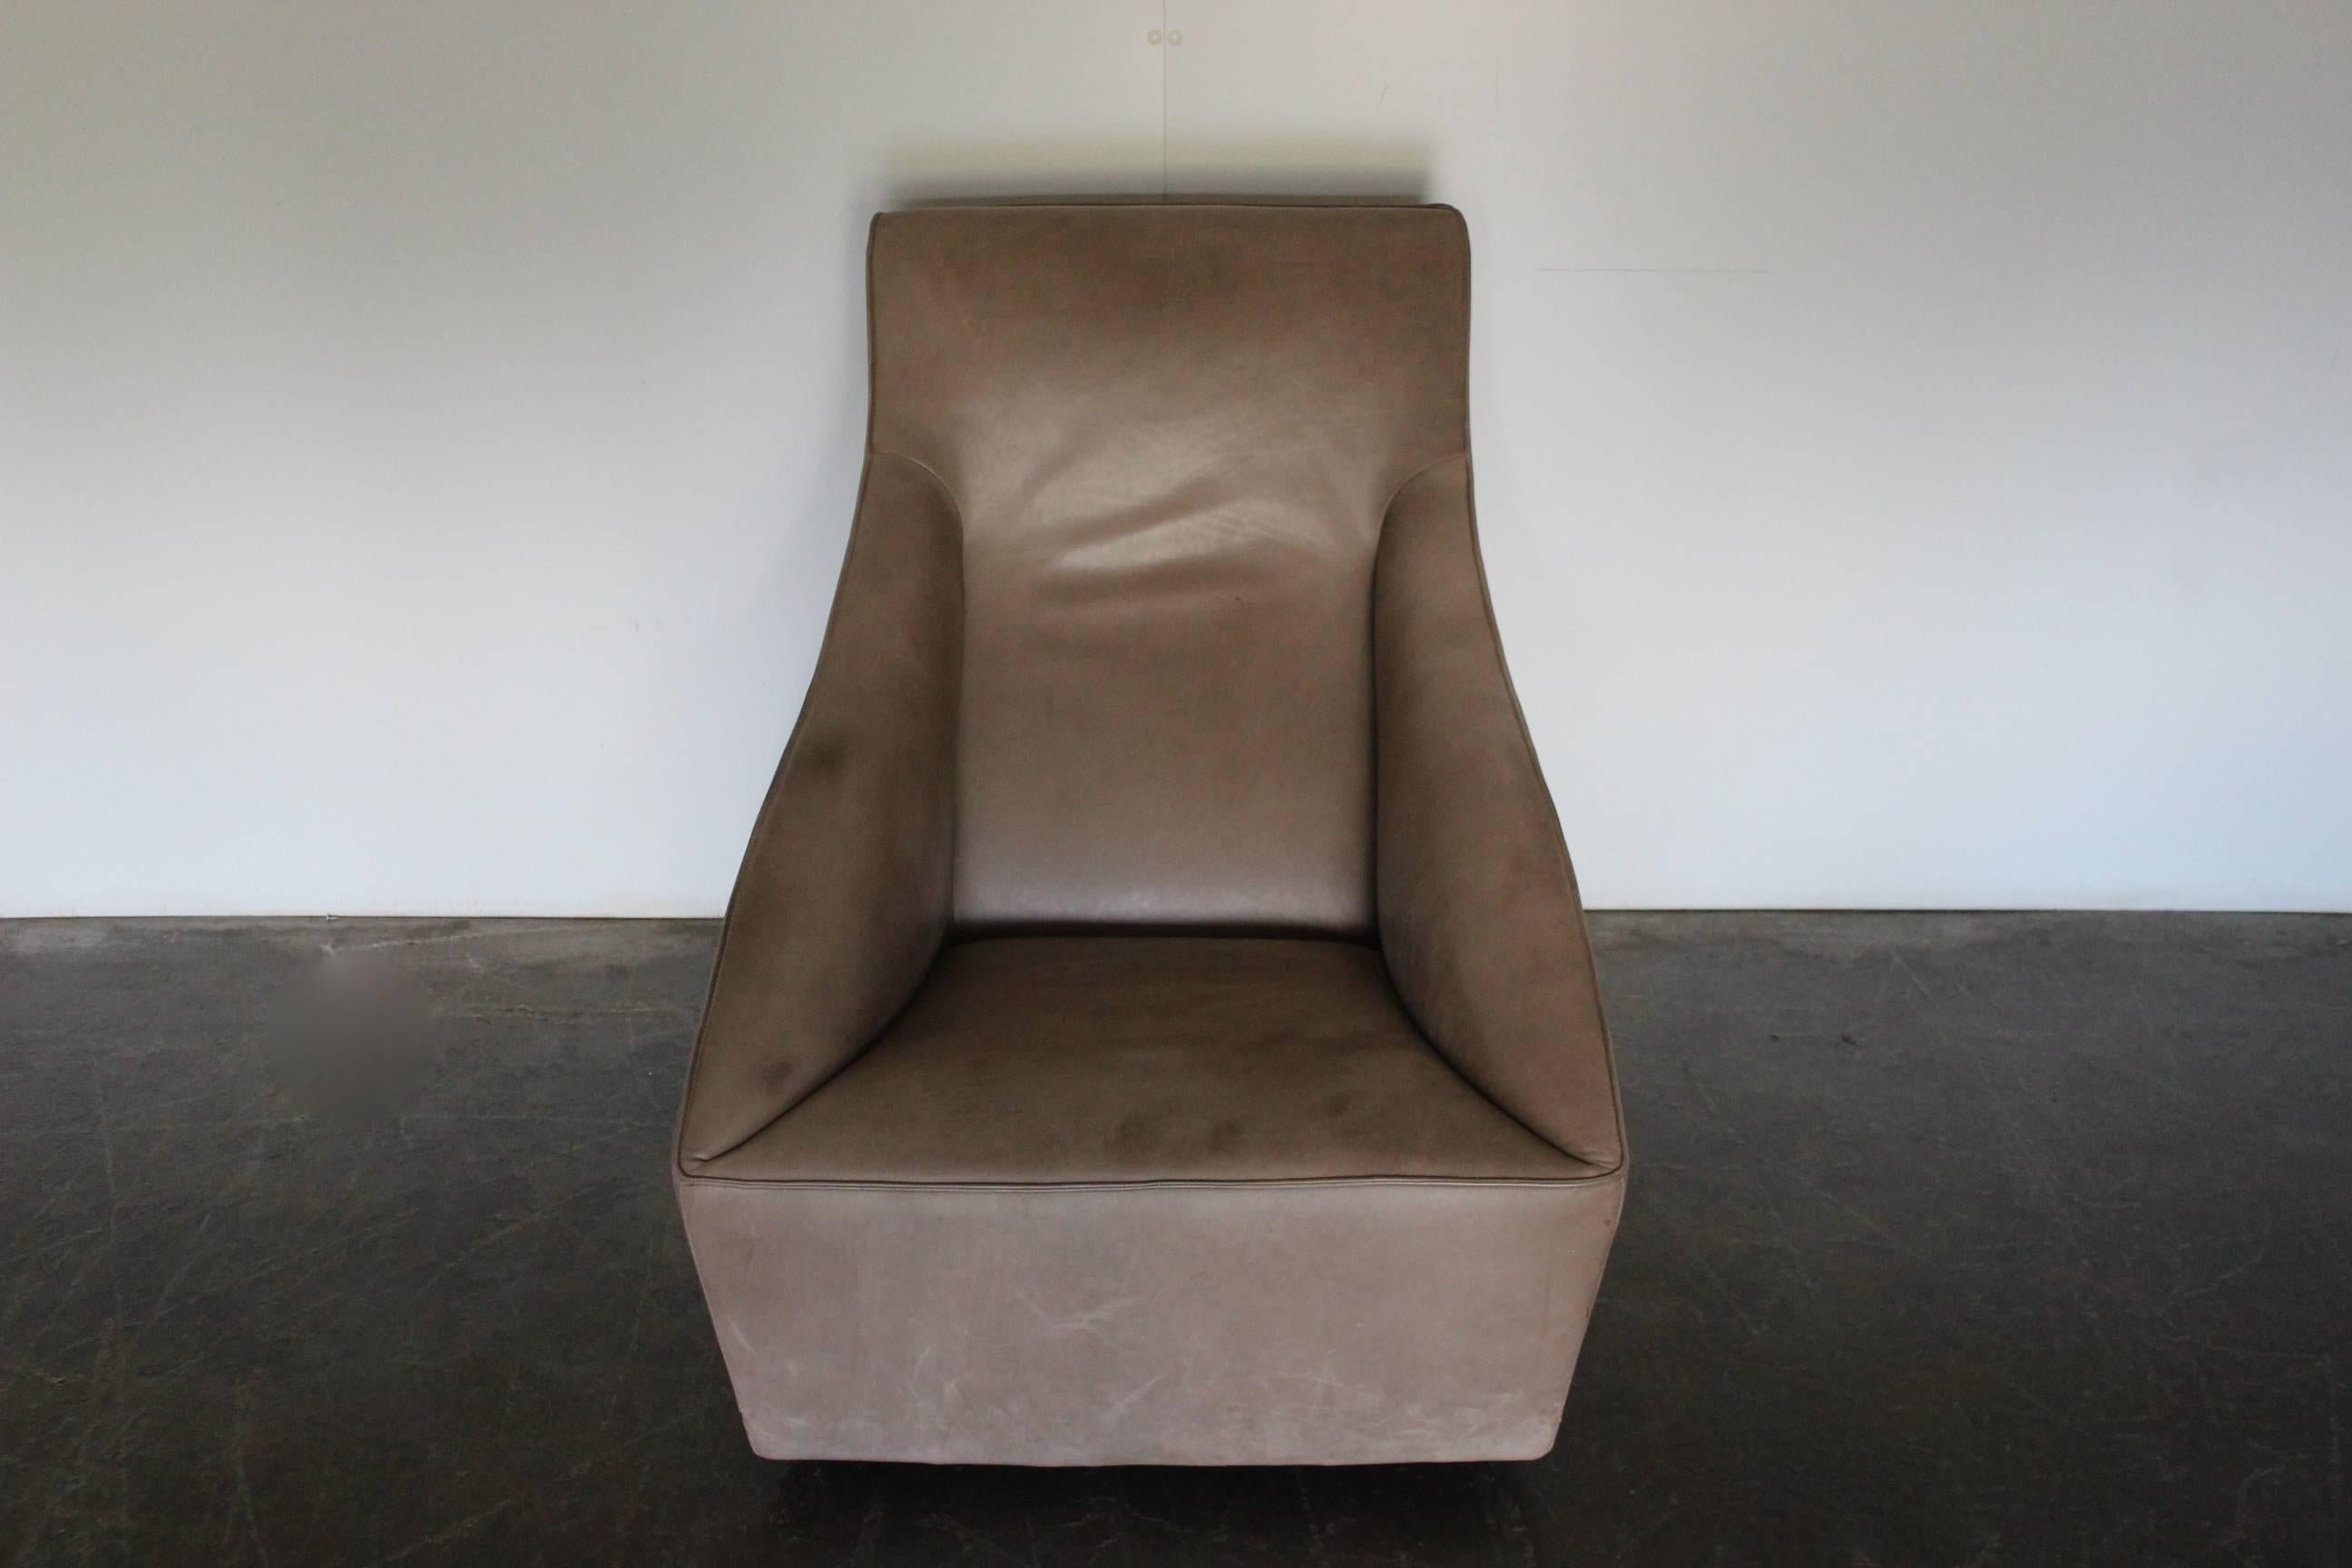 Modern Molteni & C “Doda” Armchair in Pale Walnut-Brown Leather For Sale